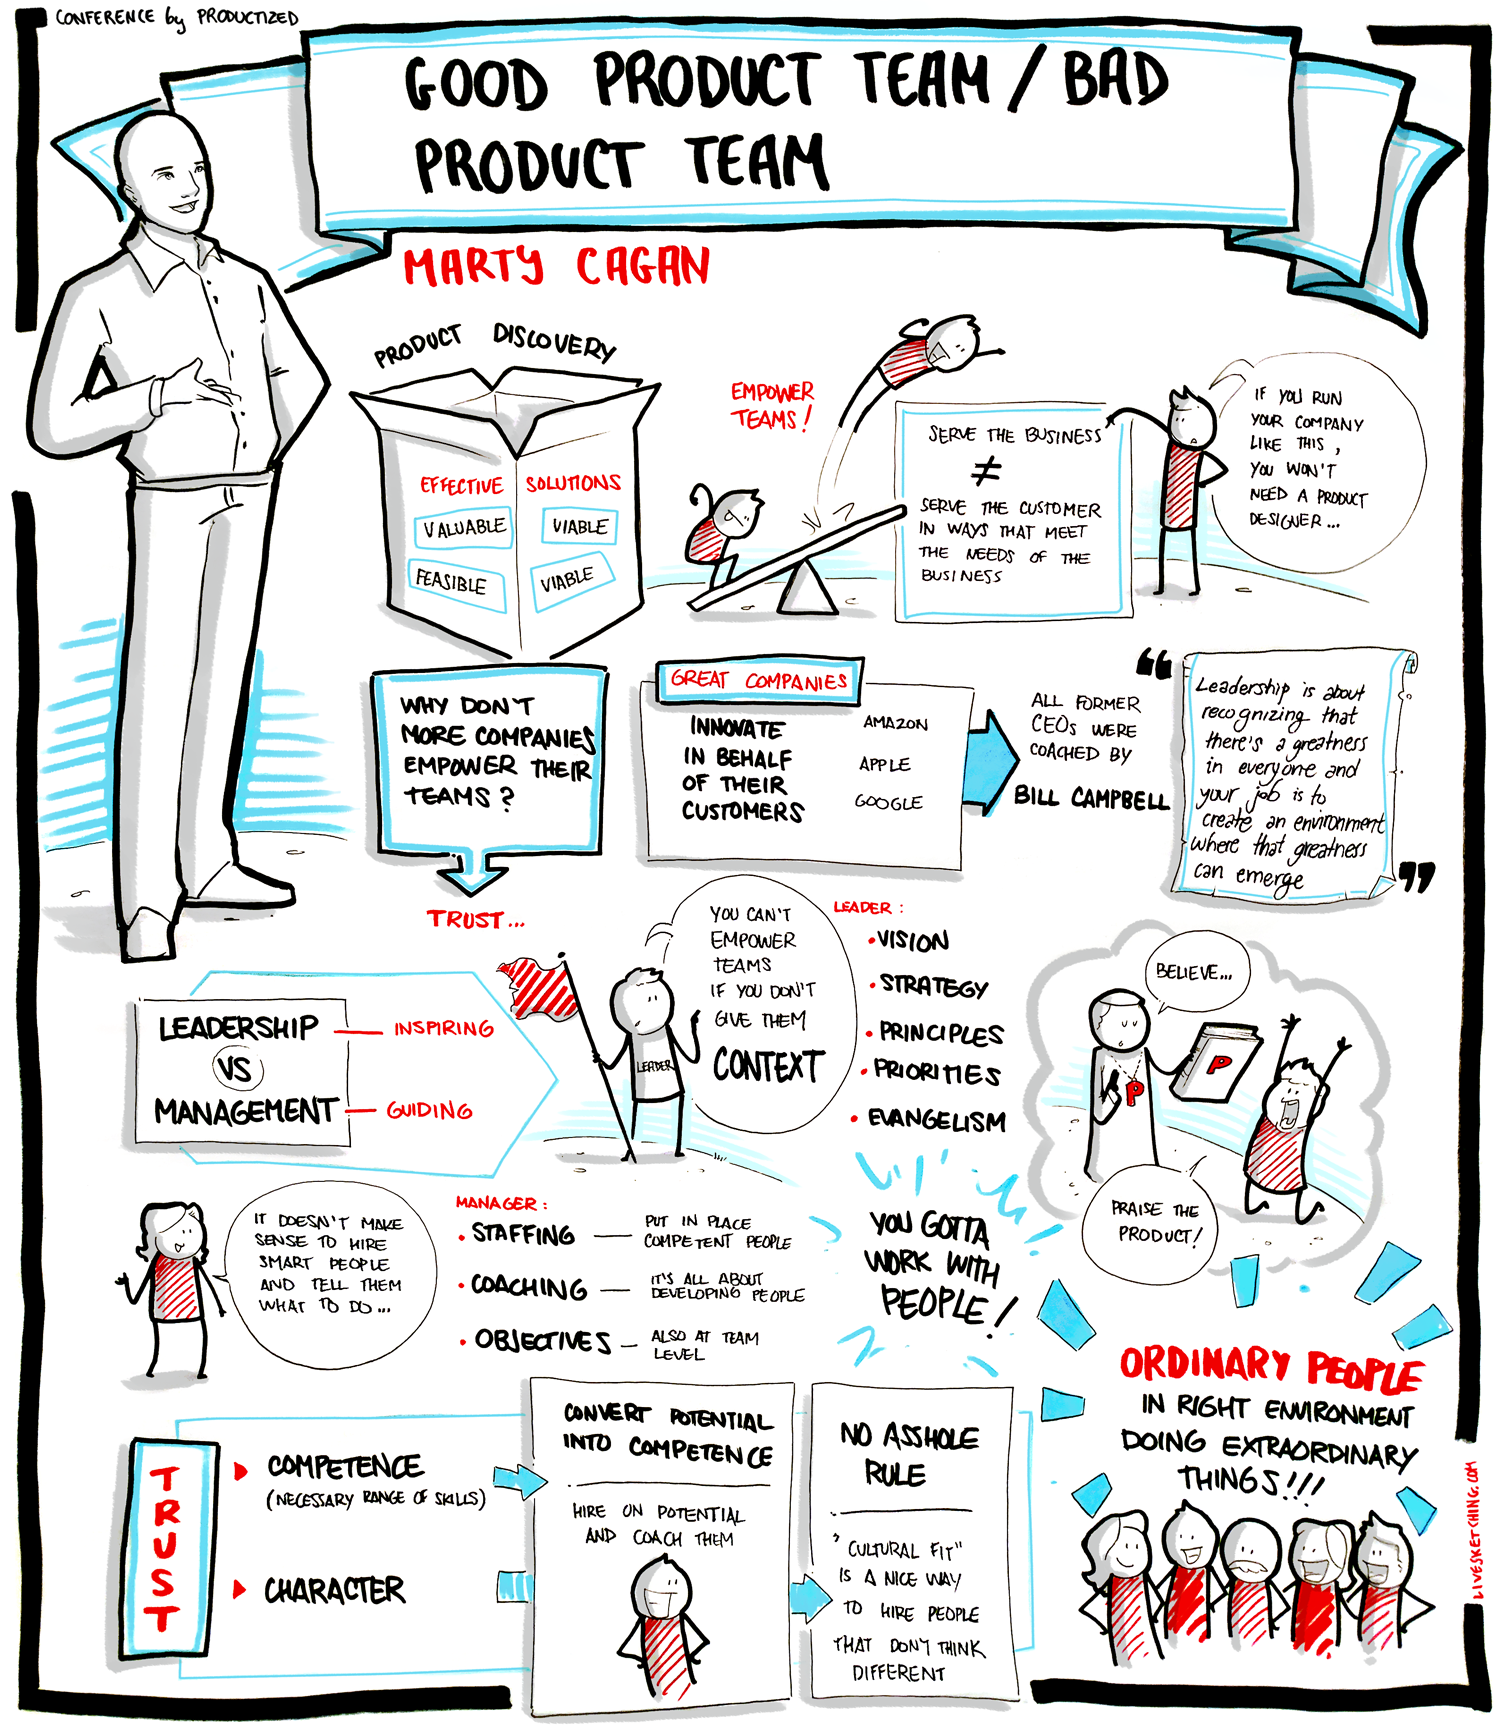 Empowered Teams infographic